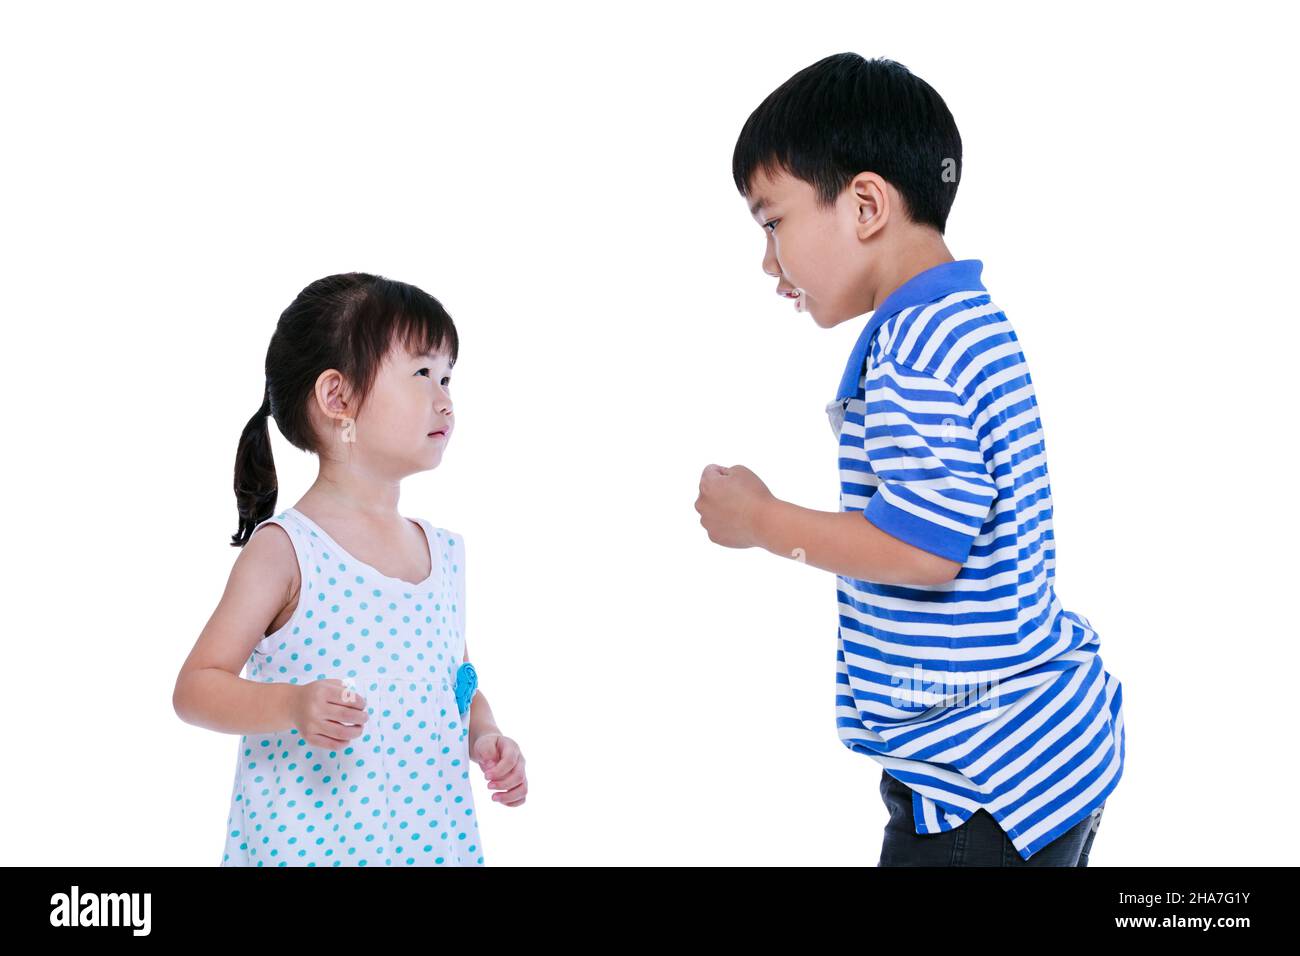 Quarreling conflict between the brother and sister. Asian kids are fighting, isolated on white background. Stock Photo